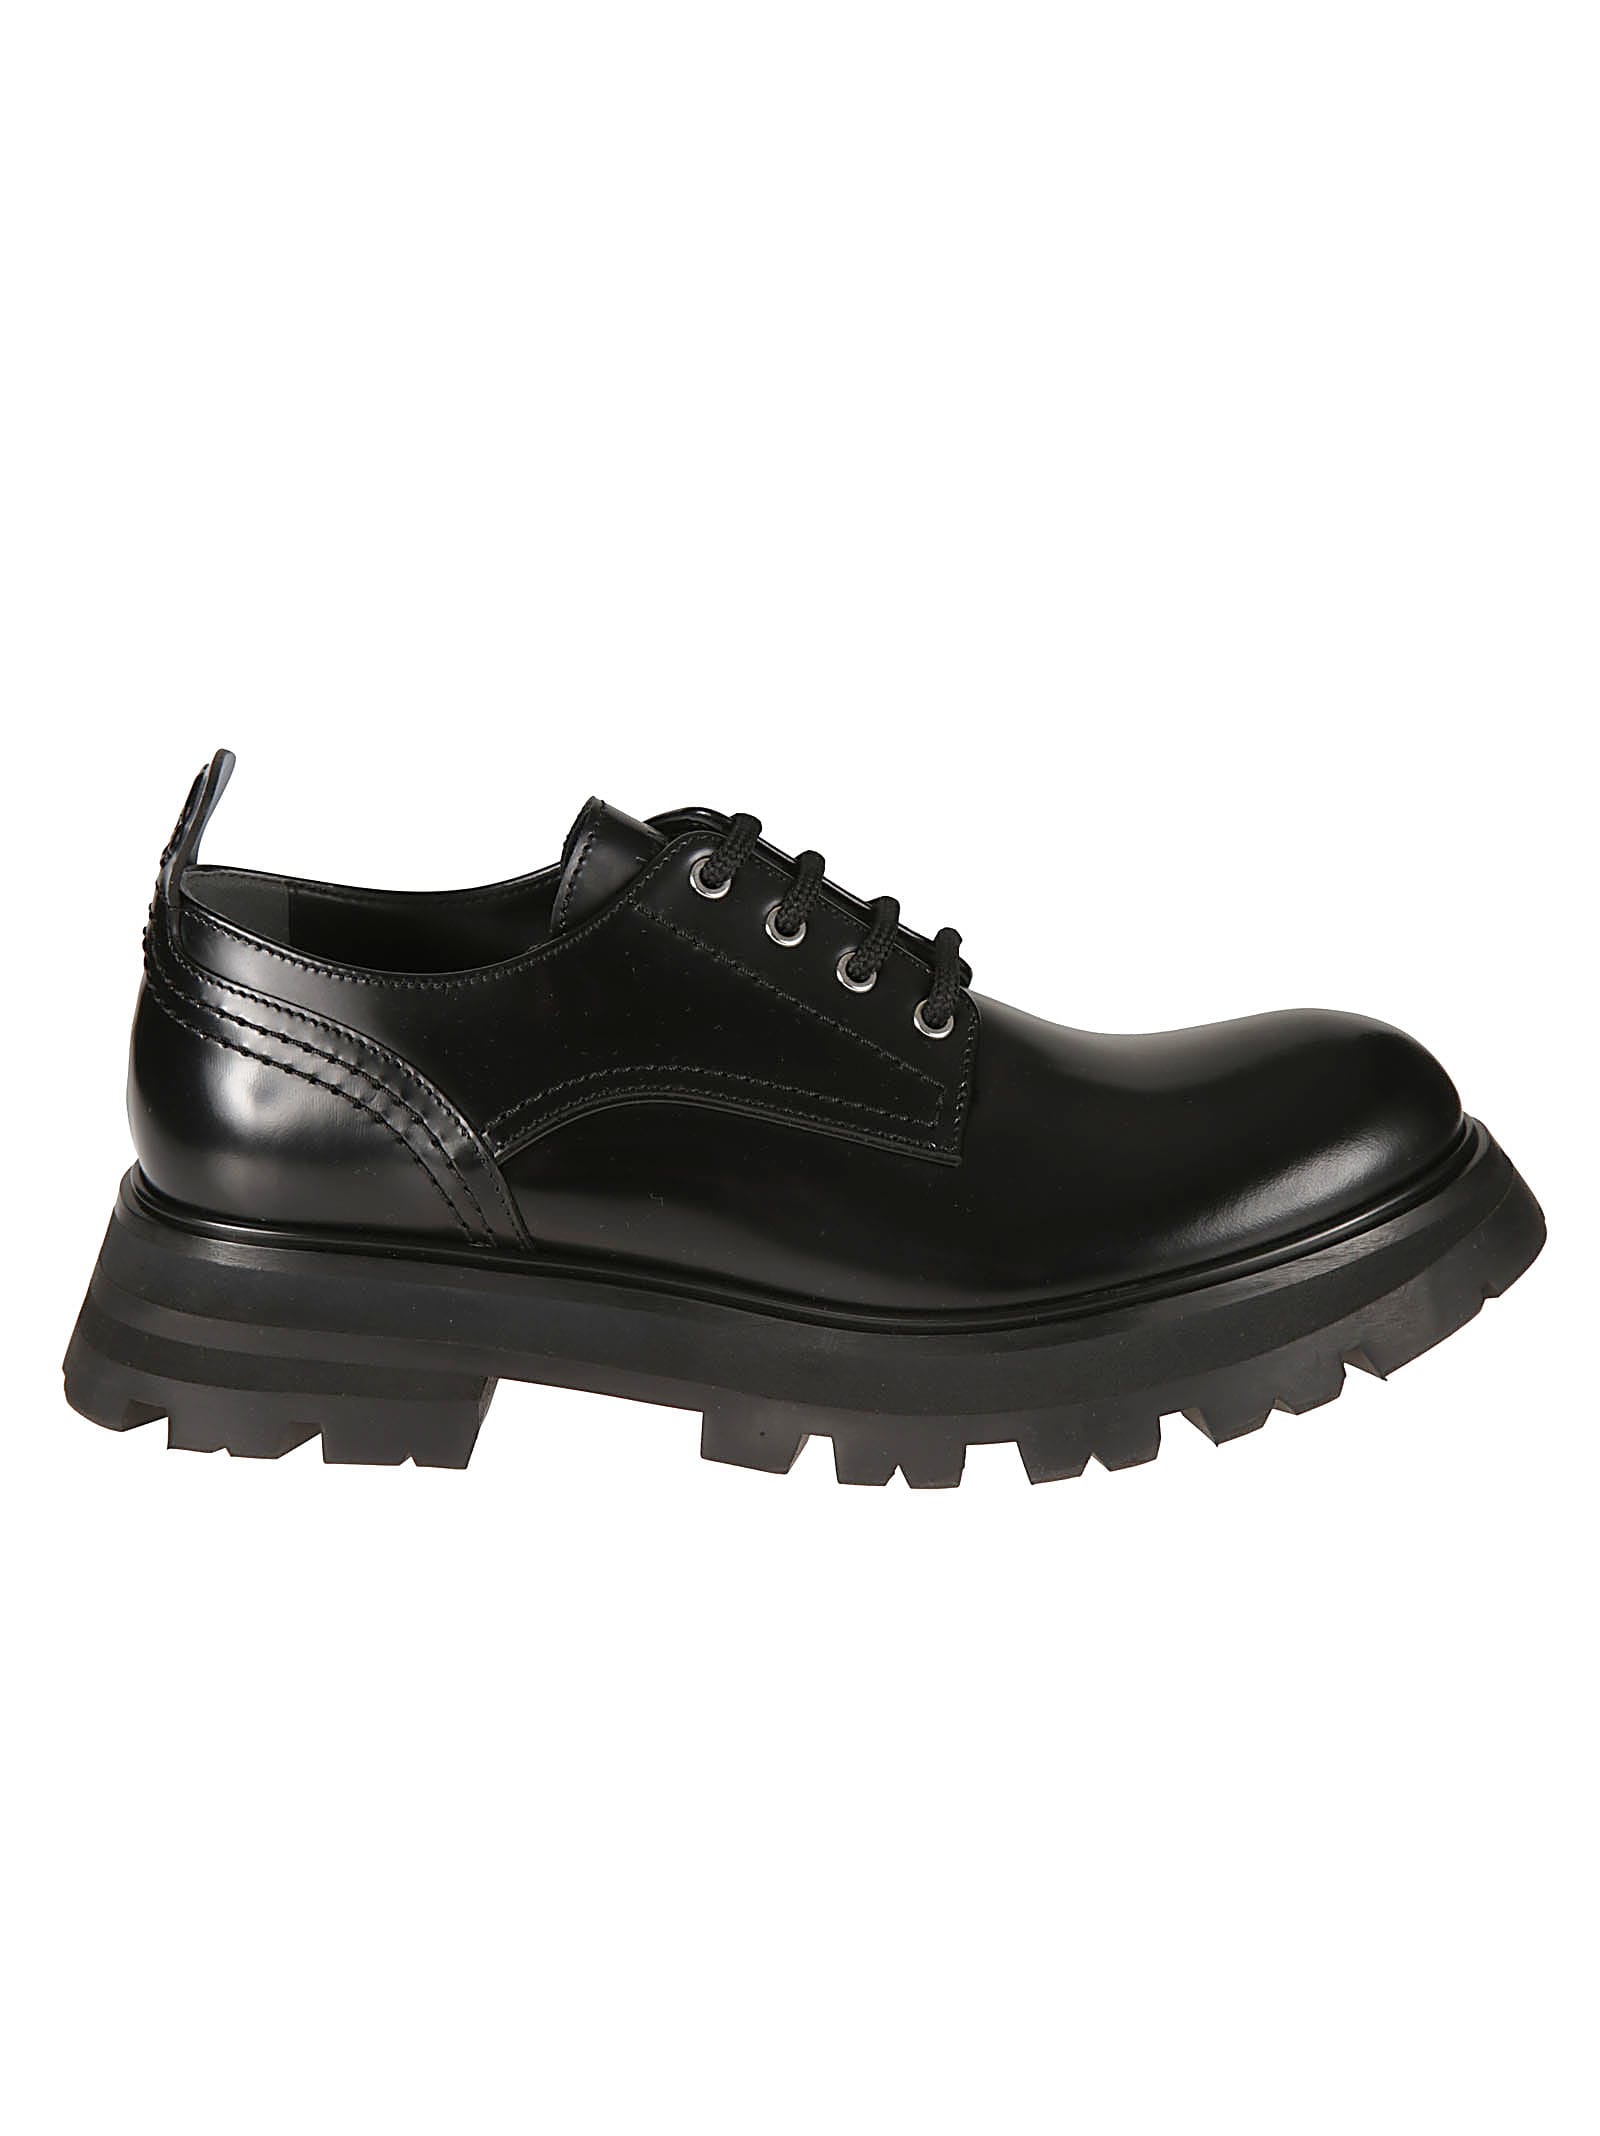 Alexander McQueen Shiny Derby Shoes